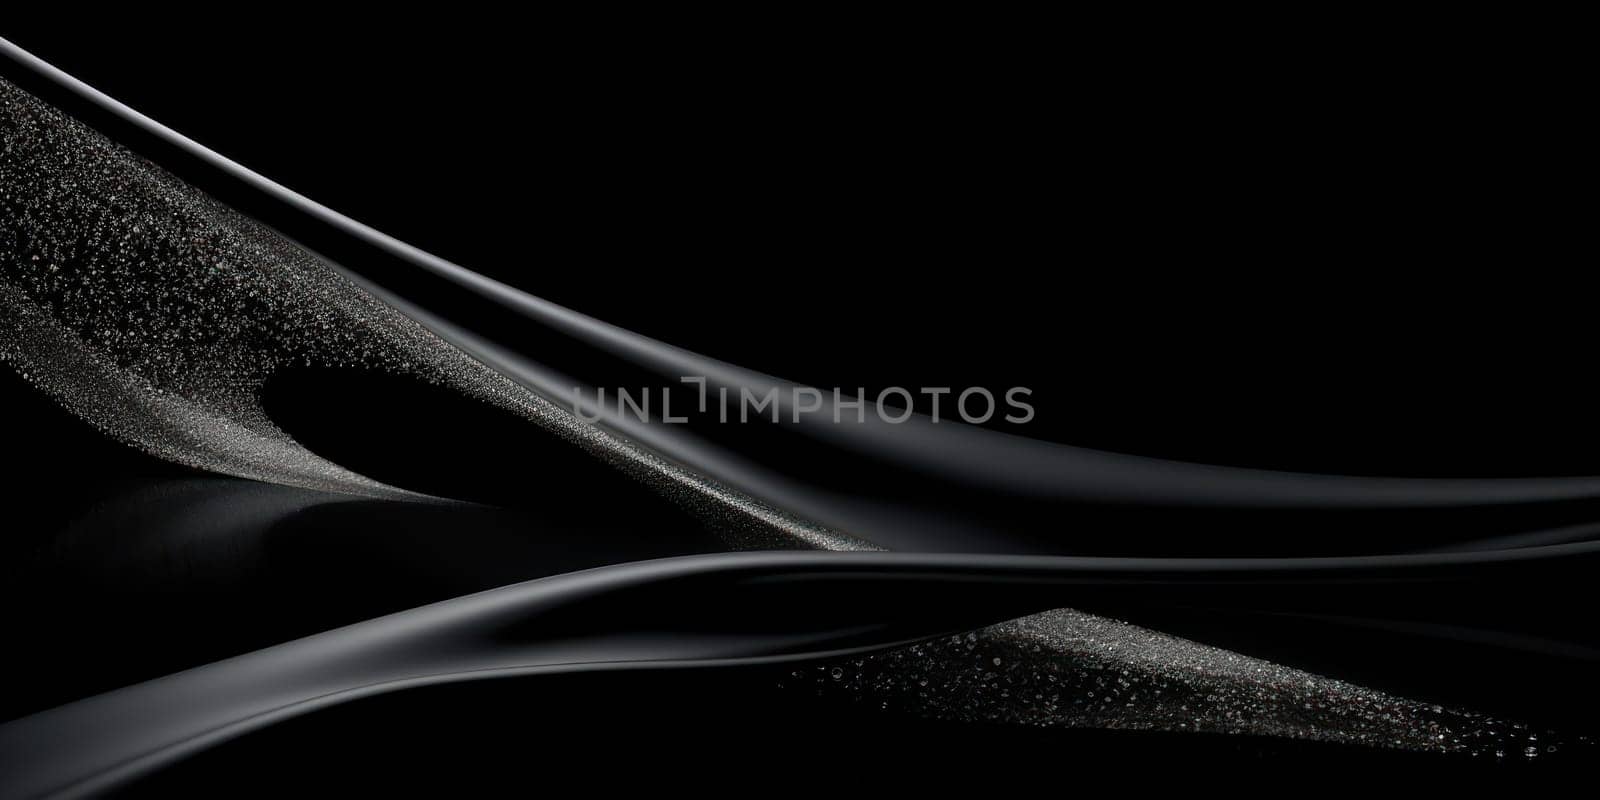 Smooth Black Wave: A Modern Abstract Design with Elegant Curve Motion on a Dark Background